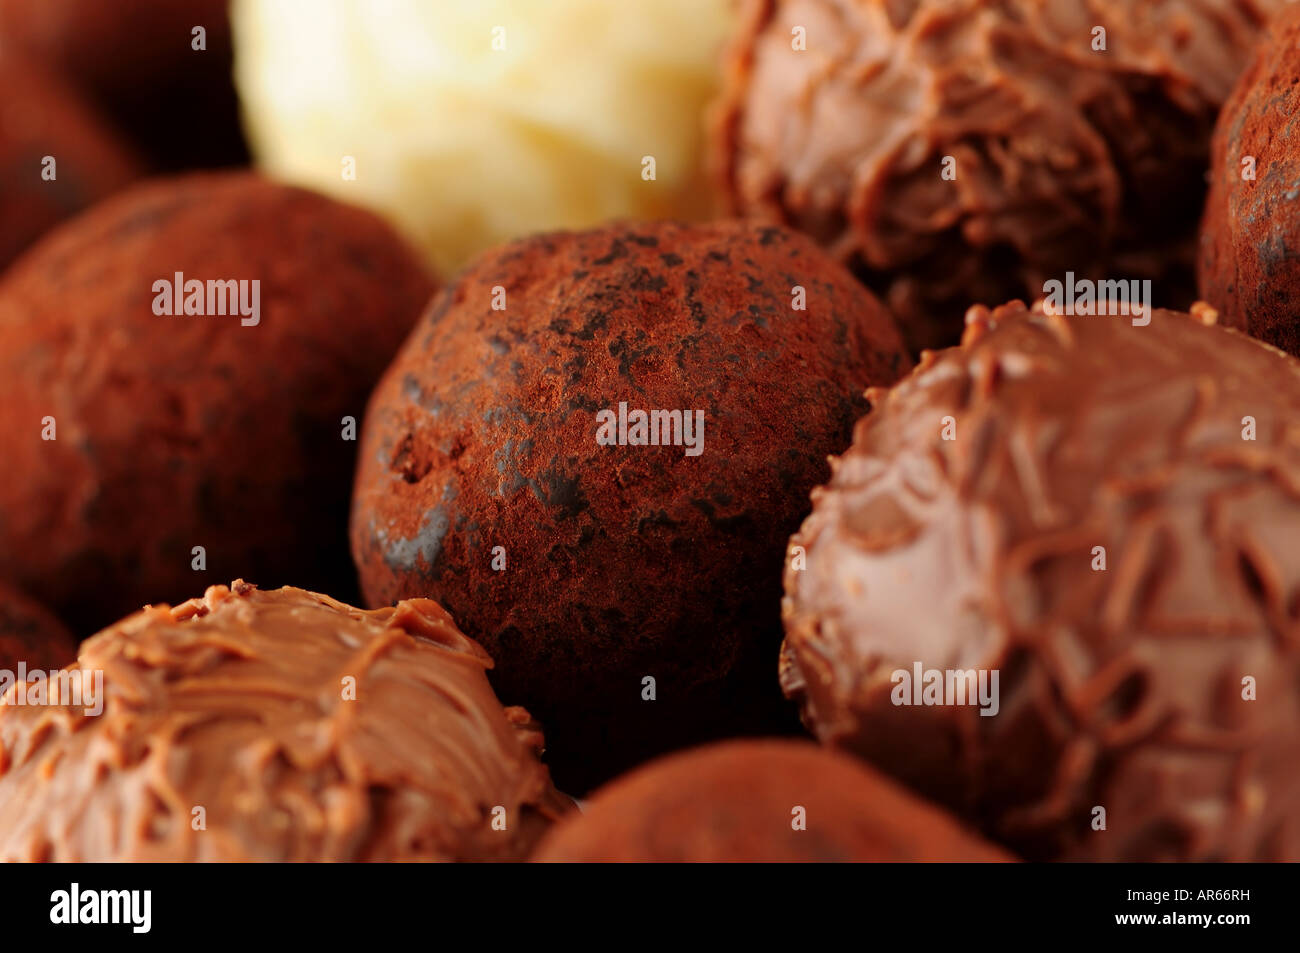 Several assorted gourmet chocolate truffles close up Stock Photo